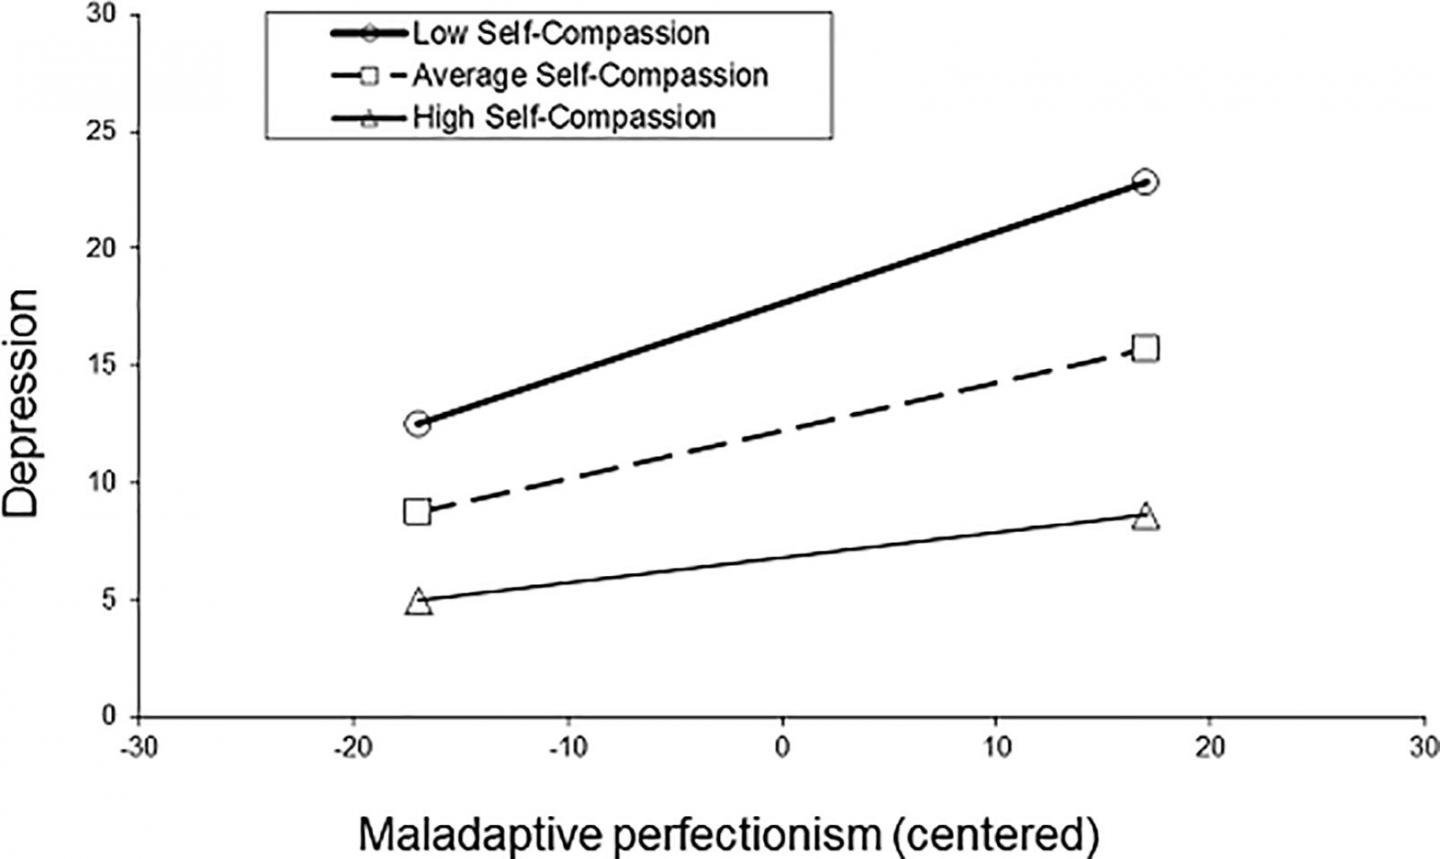 Self-compassion May Protect People From the Harmful Effects of Perfectionism